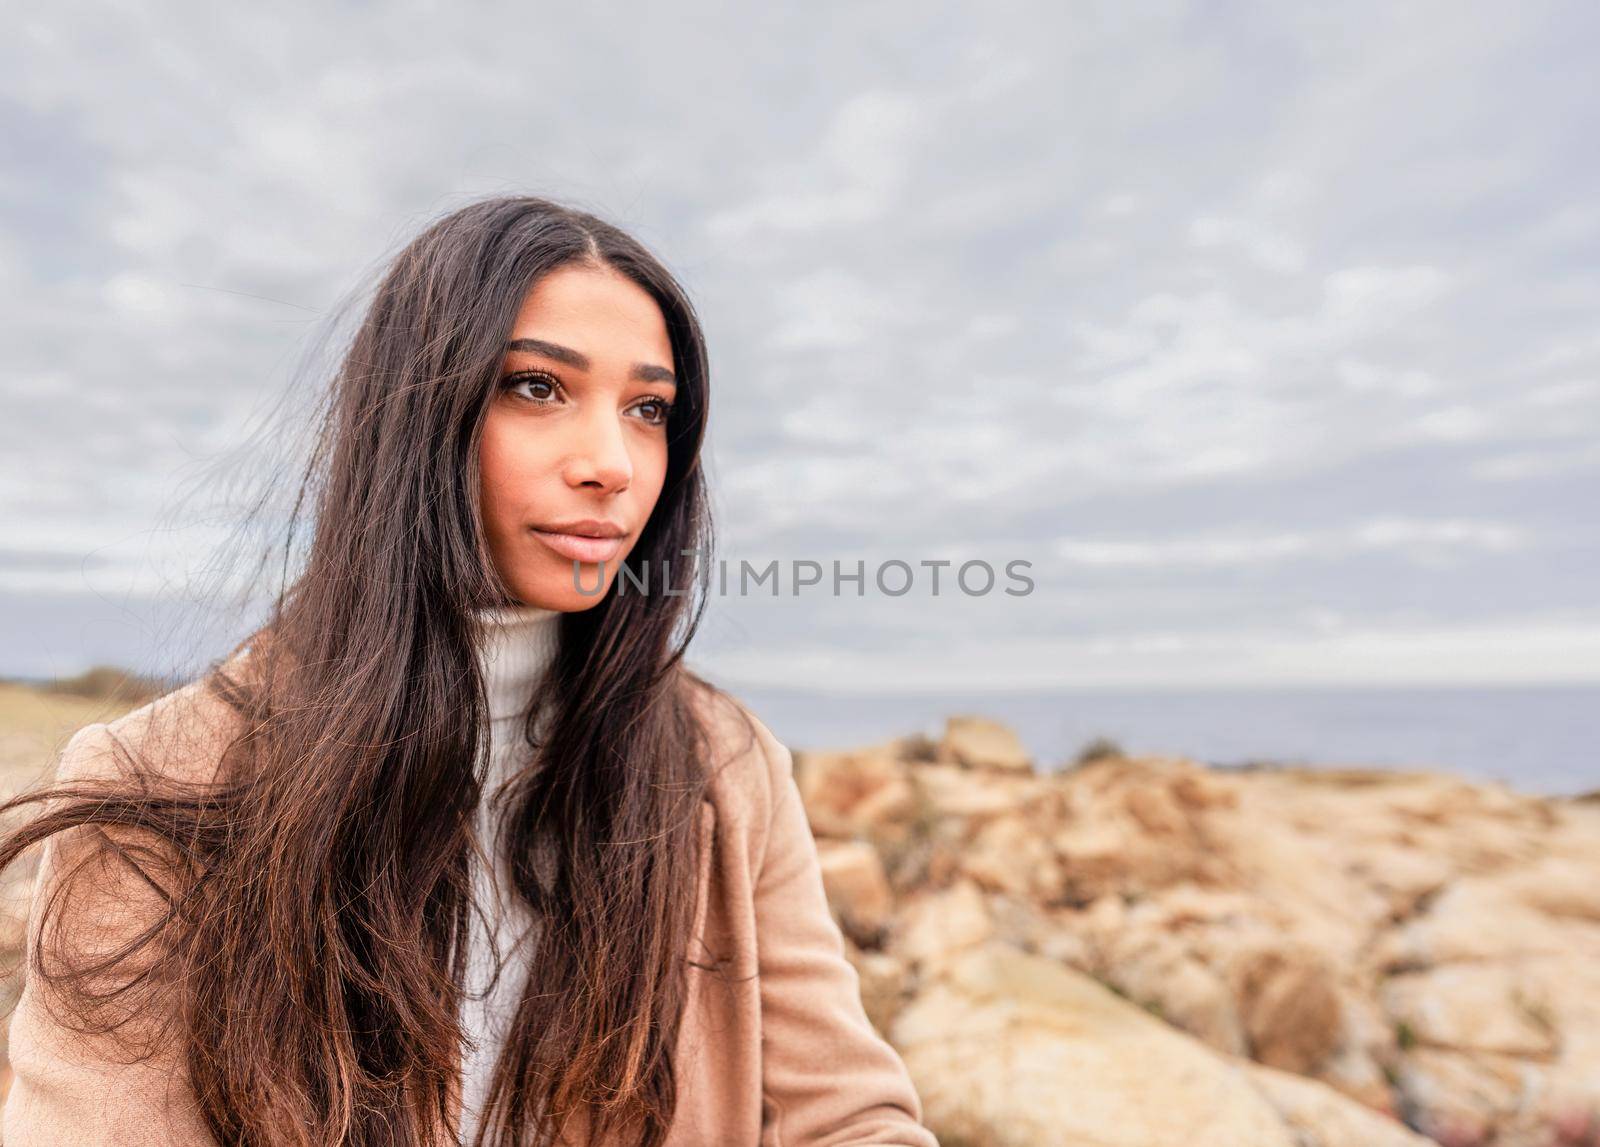 Close up portrait of young beautiful Hispanic woman with long dark hair sitting on sea rocks dreaming looking to the horizon with dramatic grey sky. Fall-winter color mood photography with copy space